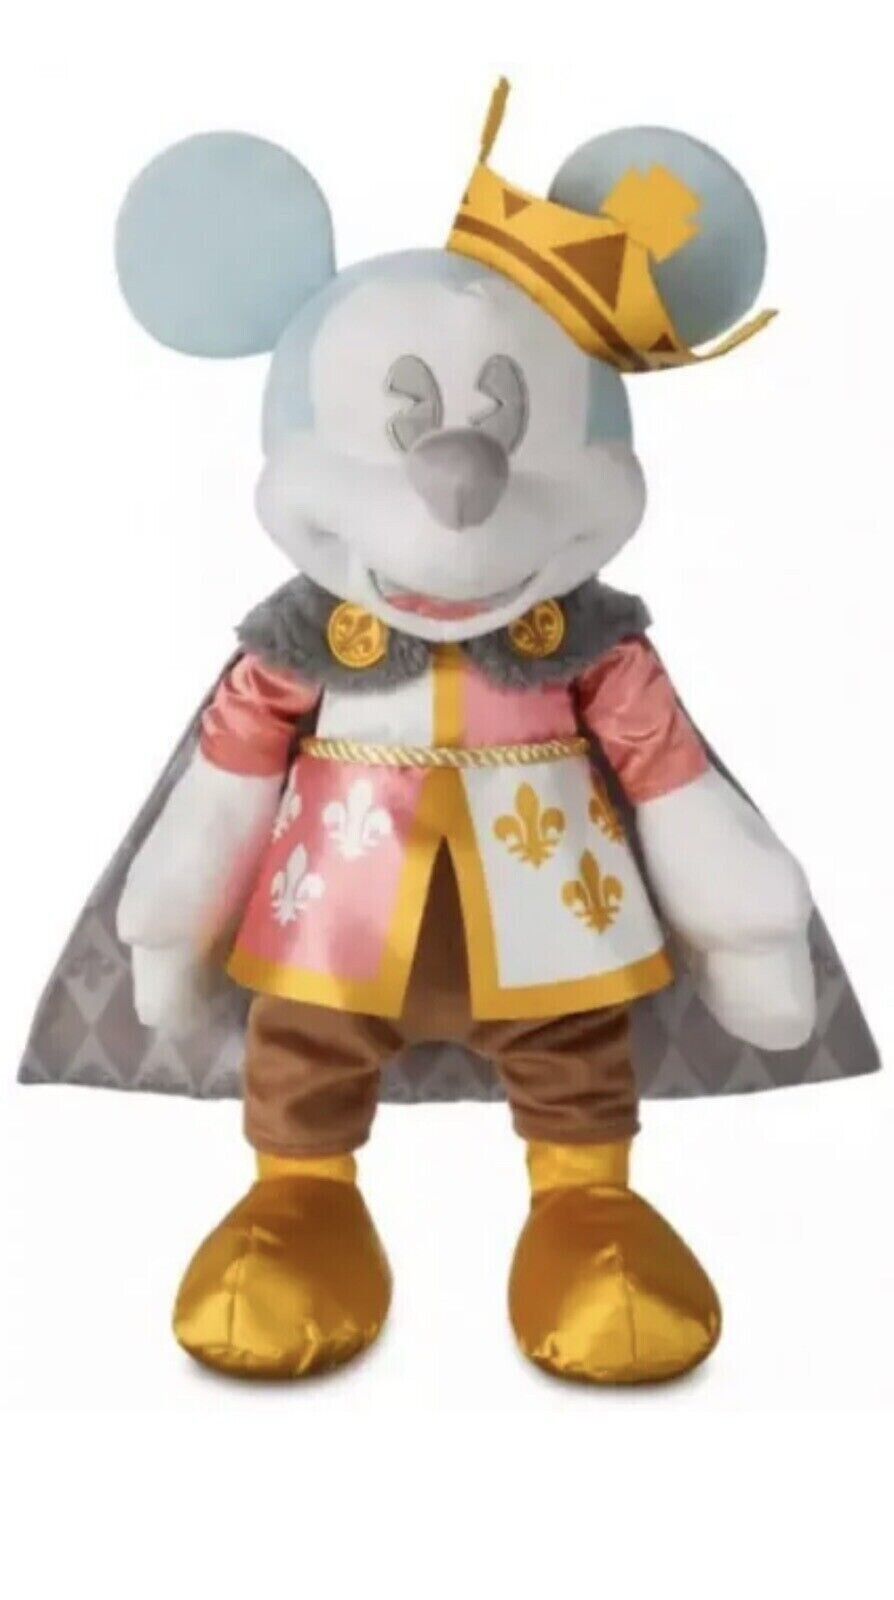 Disney Mickey mouse plush the main attraction Prince Charming Regal Carrousel